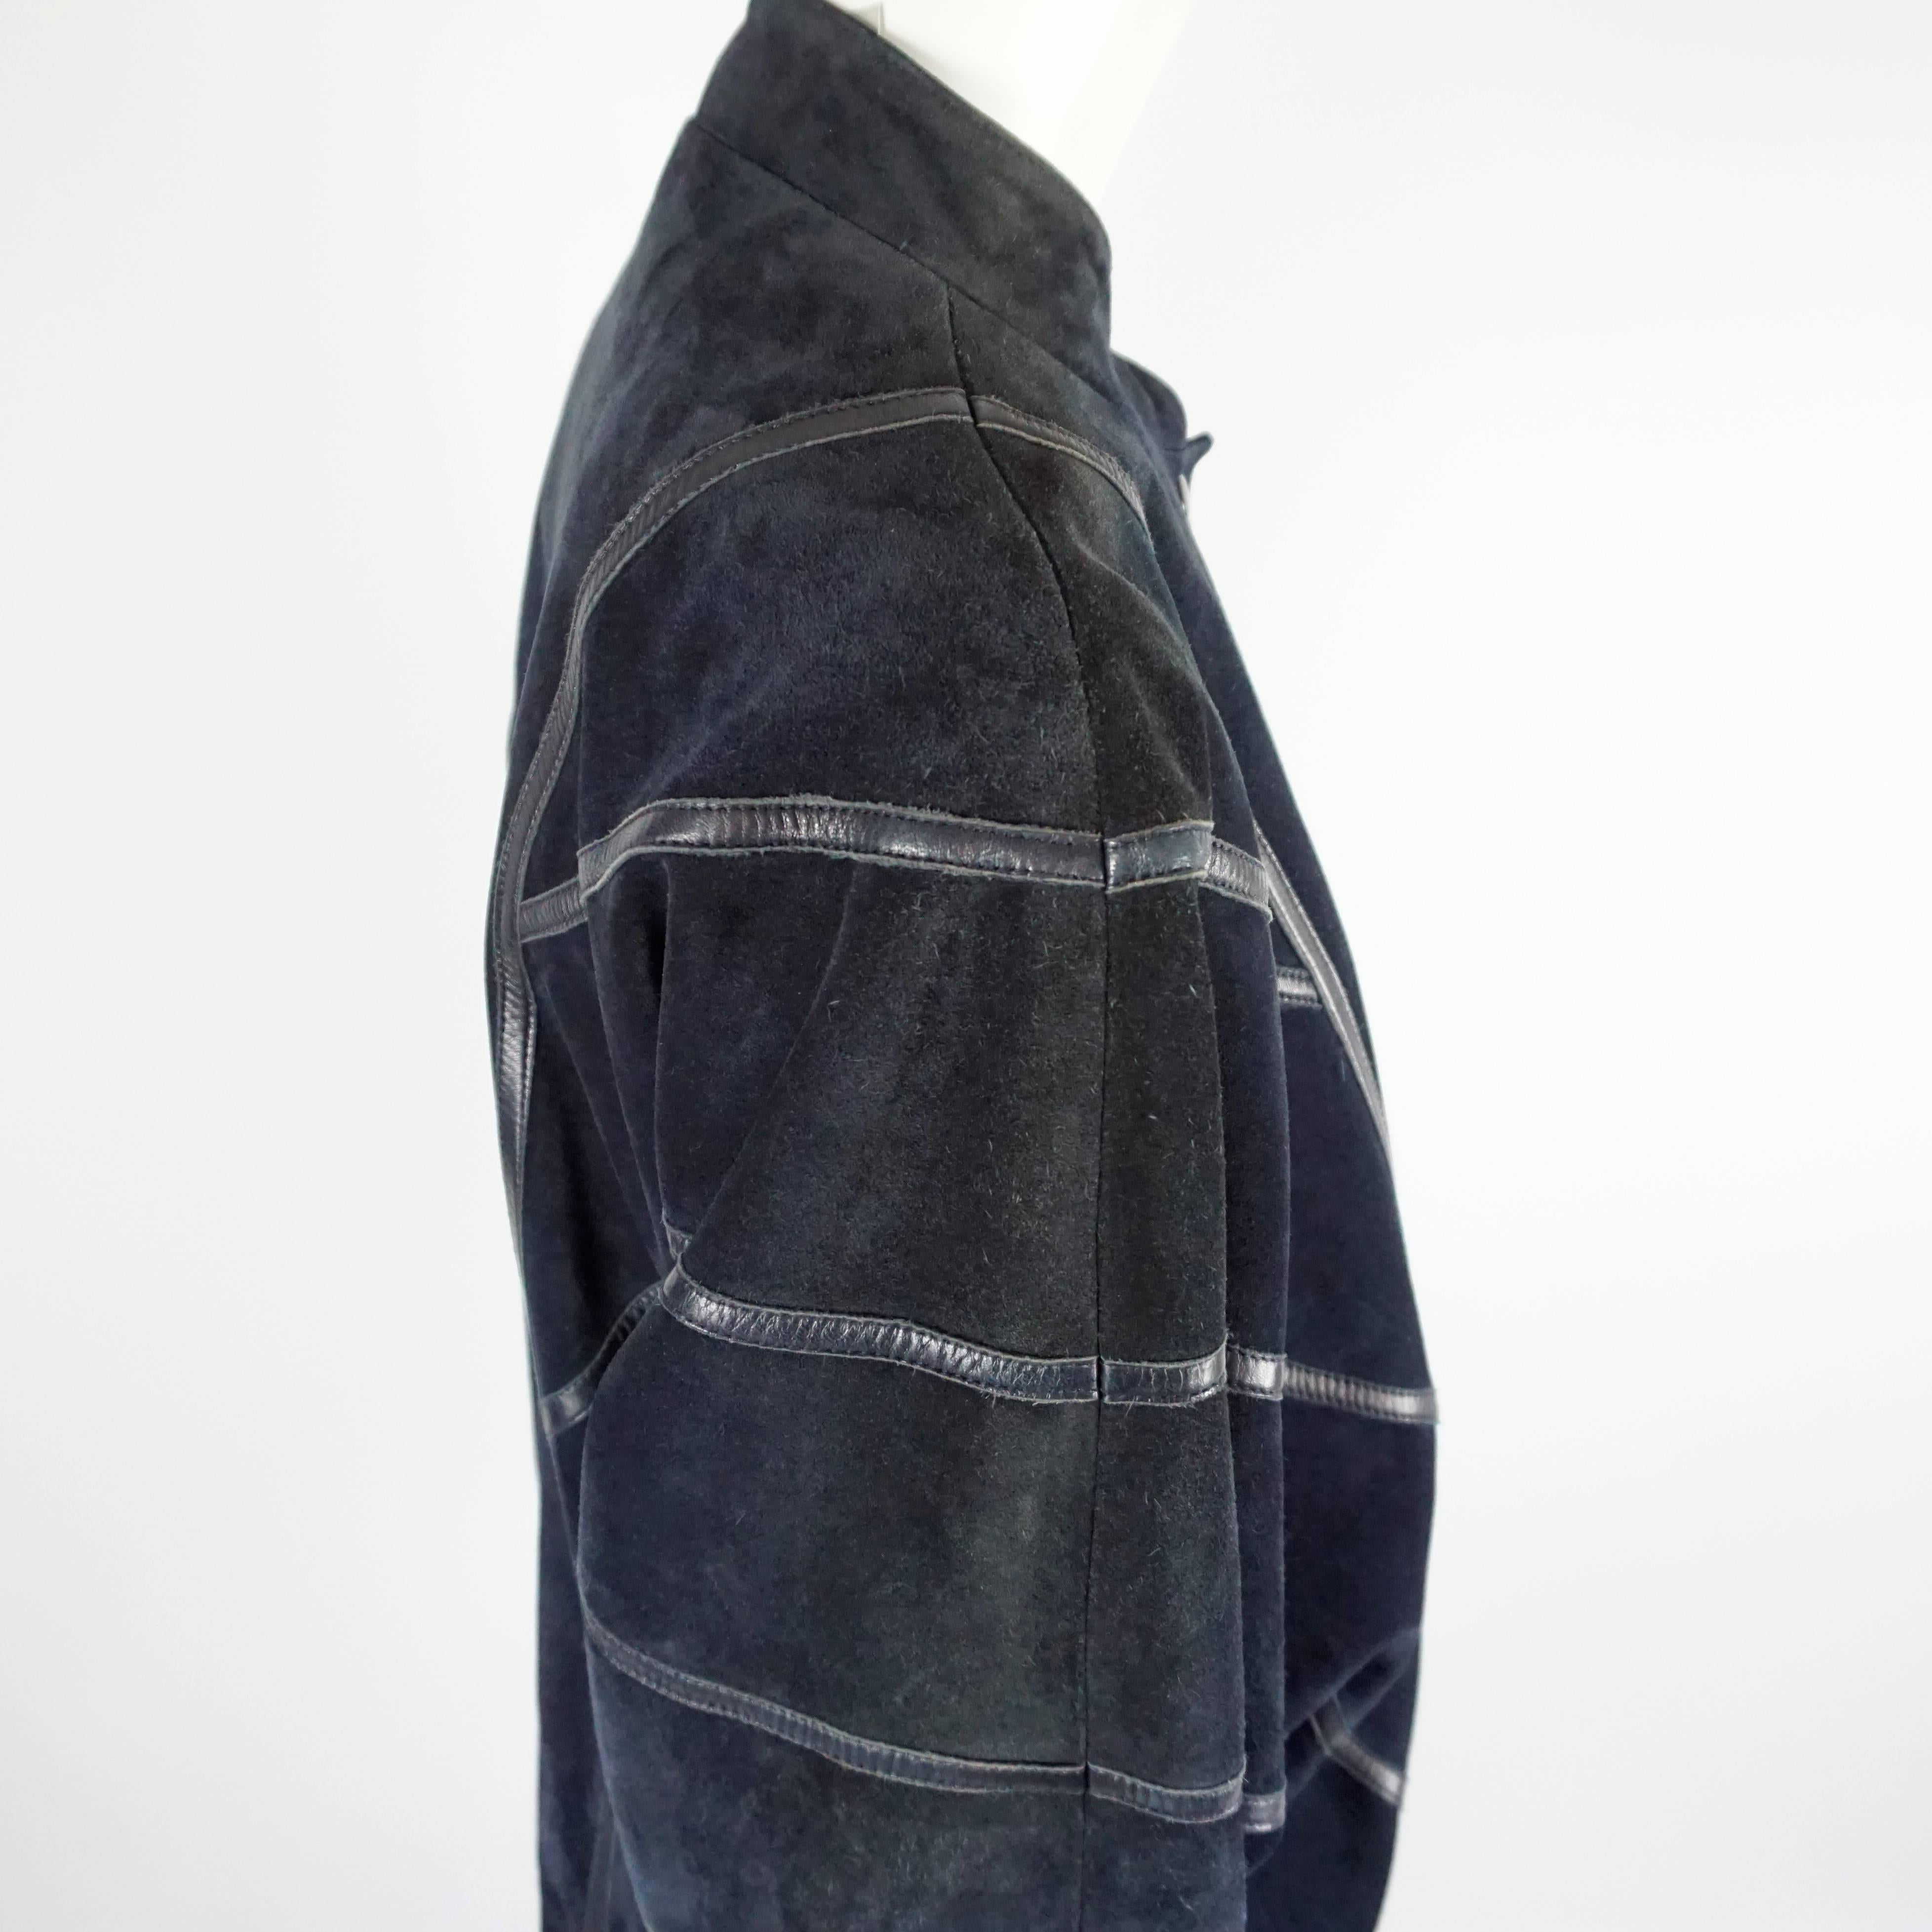 Celine Navy Suede and Leather Oversize Jacket - 42 - 1980s 1